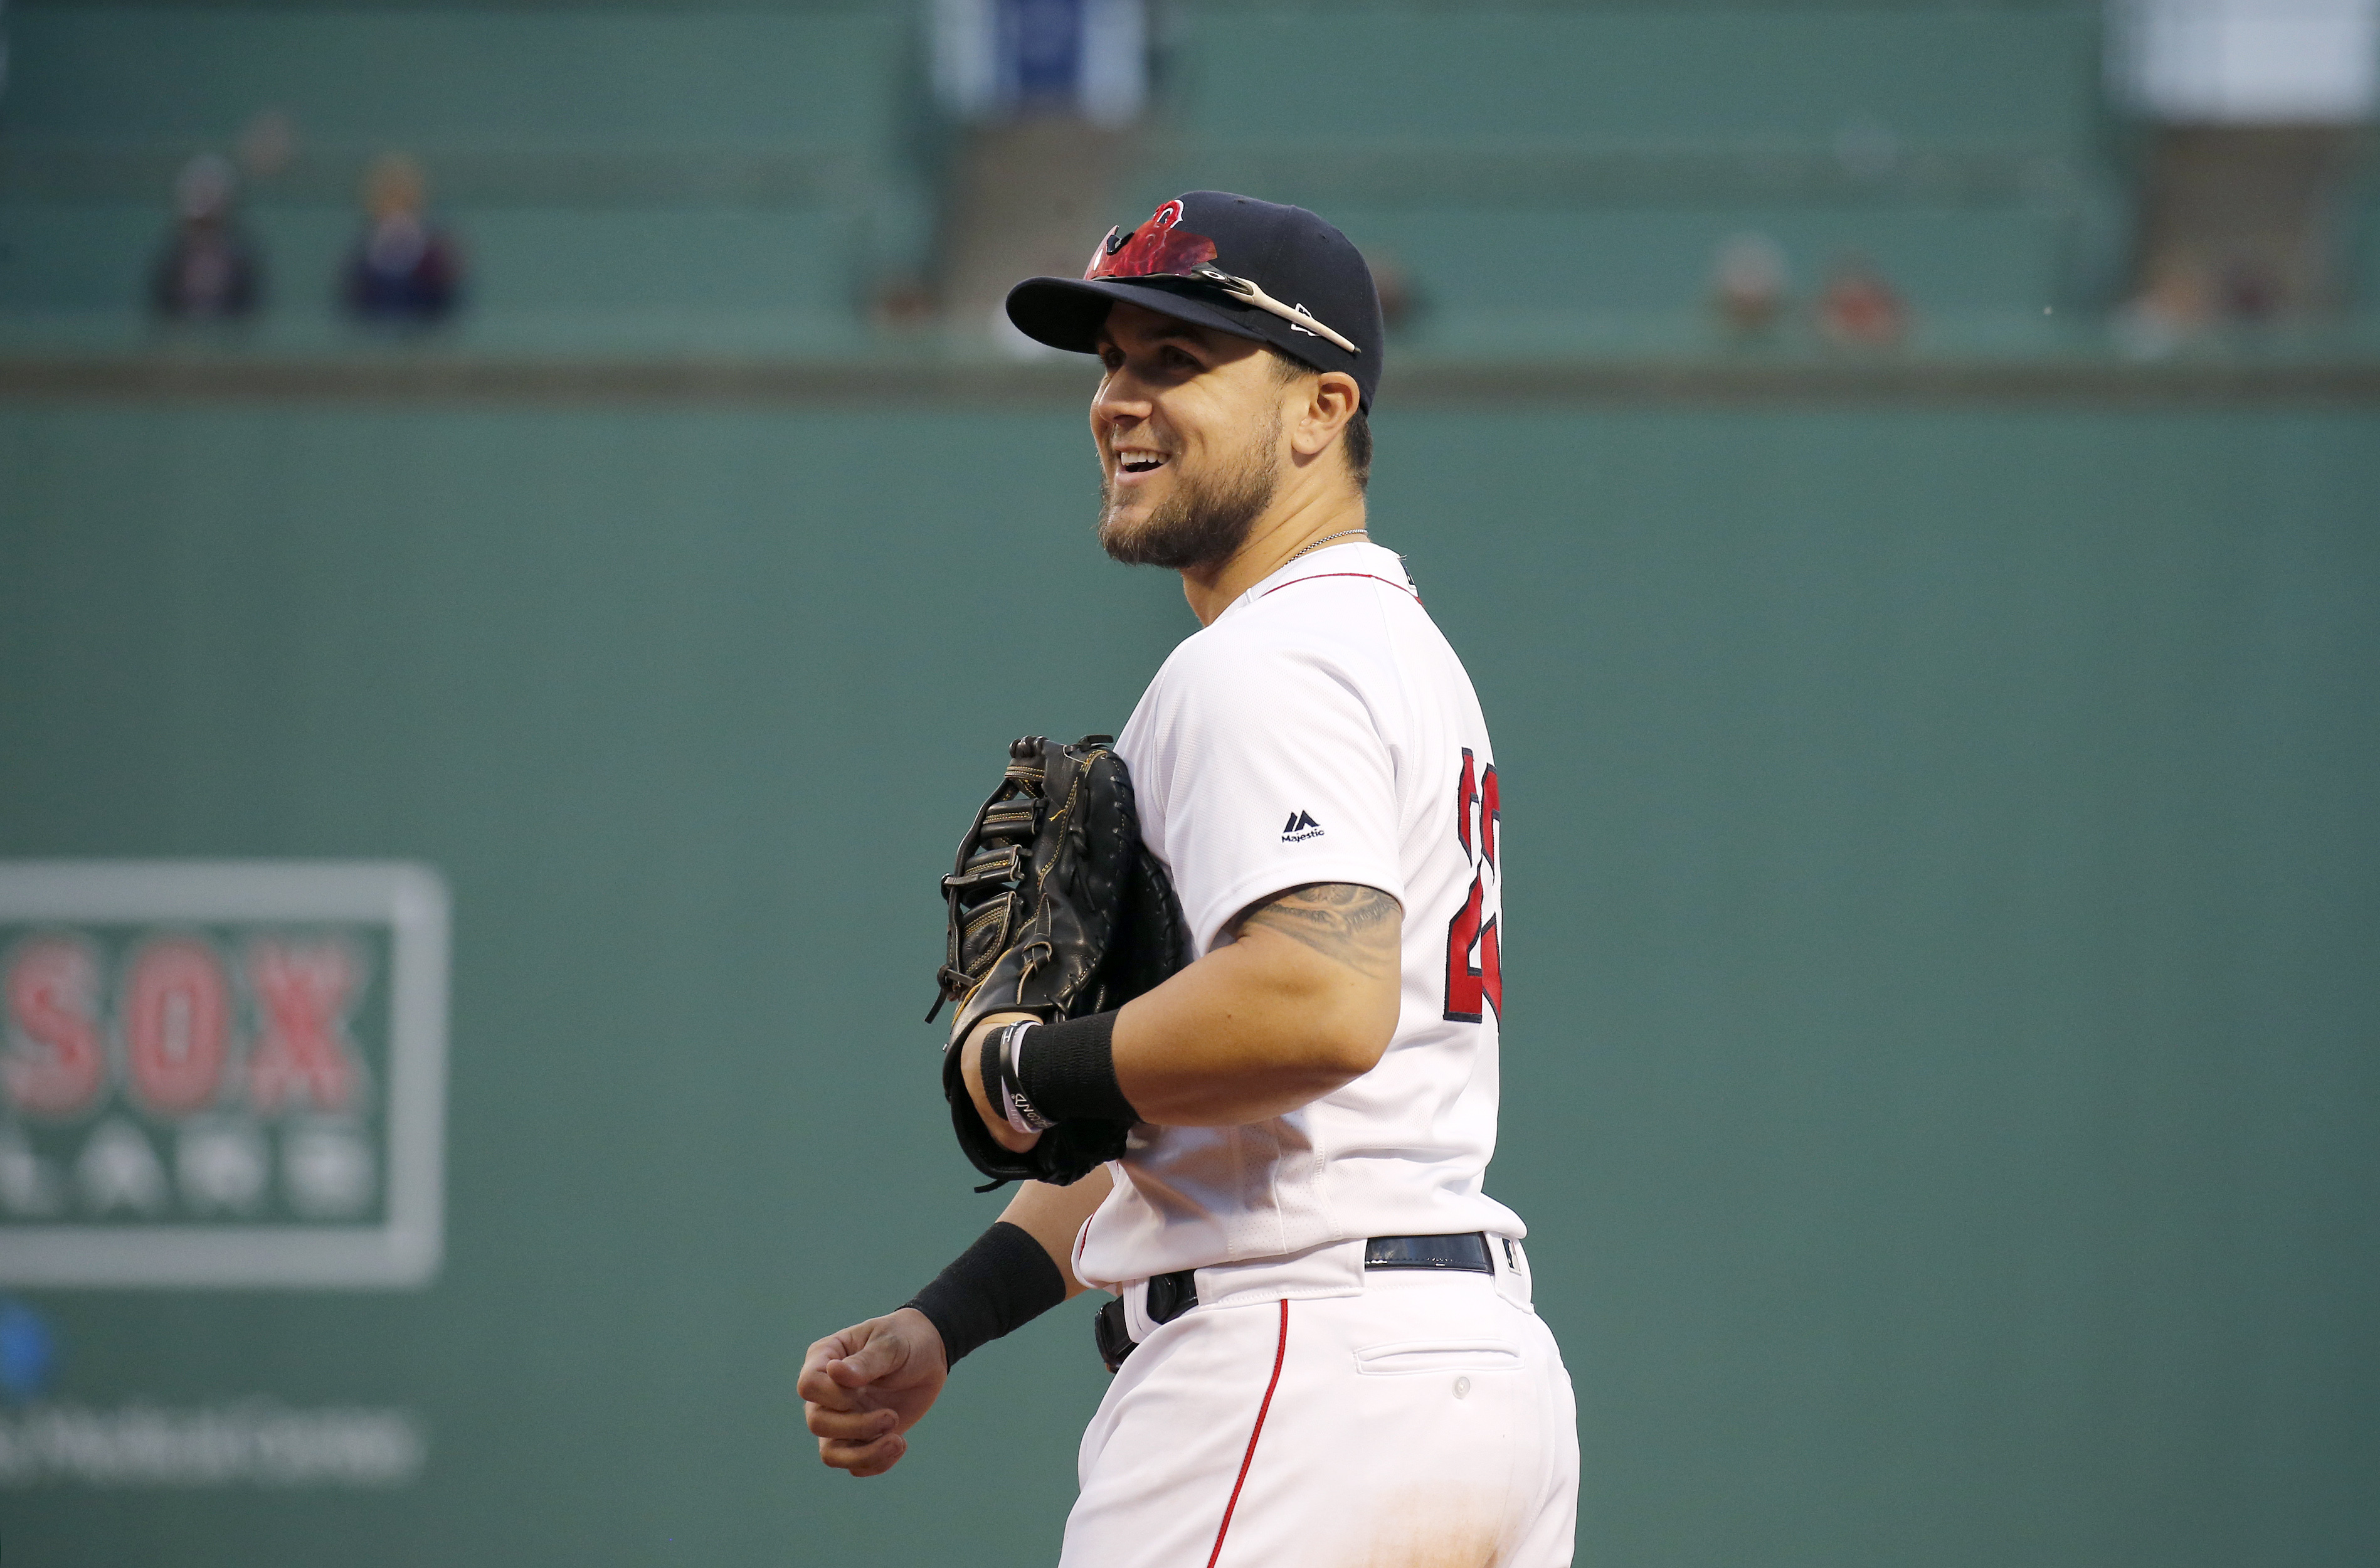 Michael Chavis posts farewell to Boston Red Sox, fan base; 'I feel blessed  to have been part of it and welcomed by y'all' 